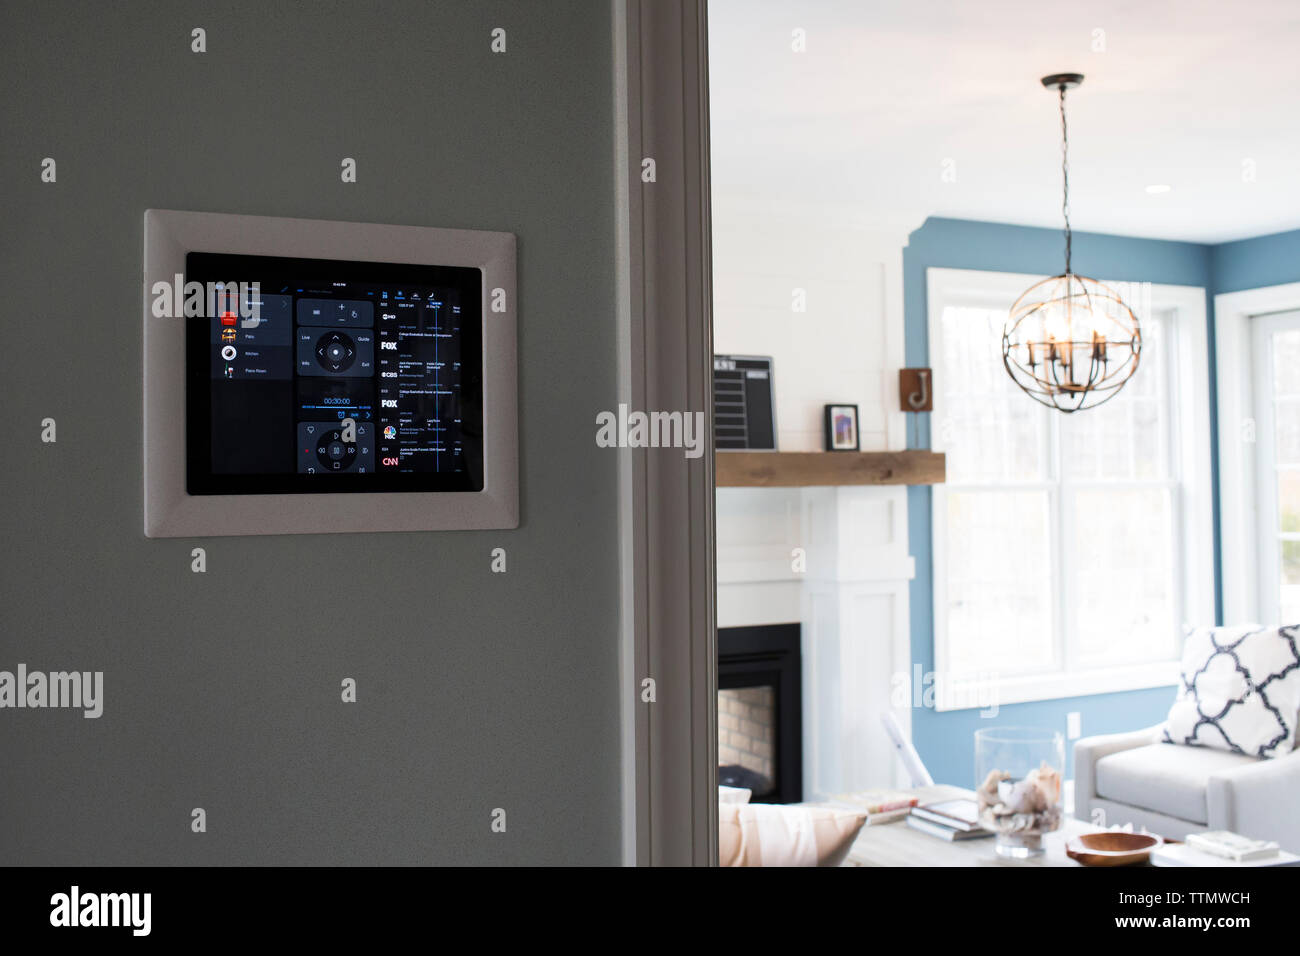 Control panel in modern house Stock Photo